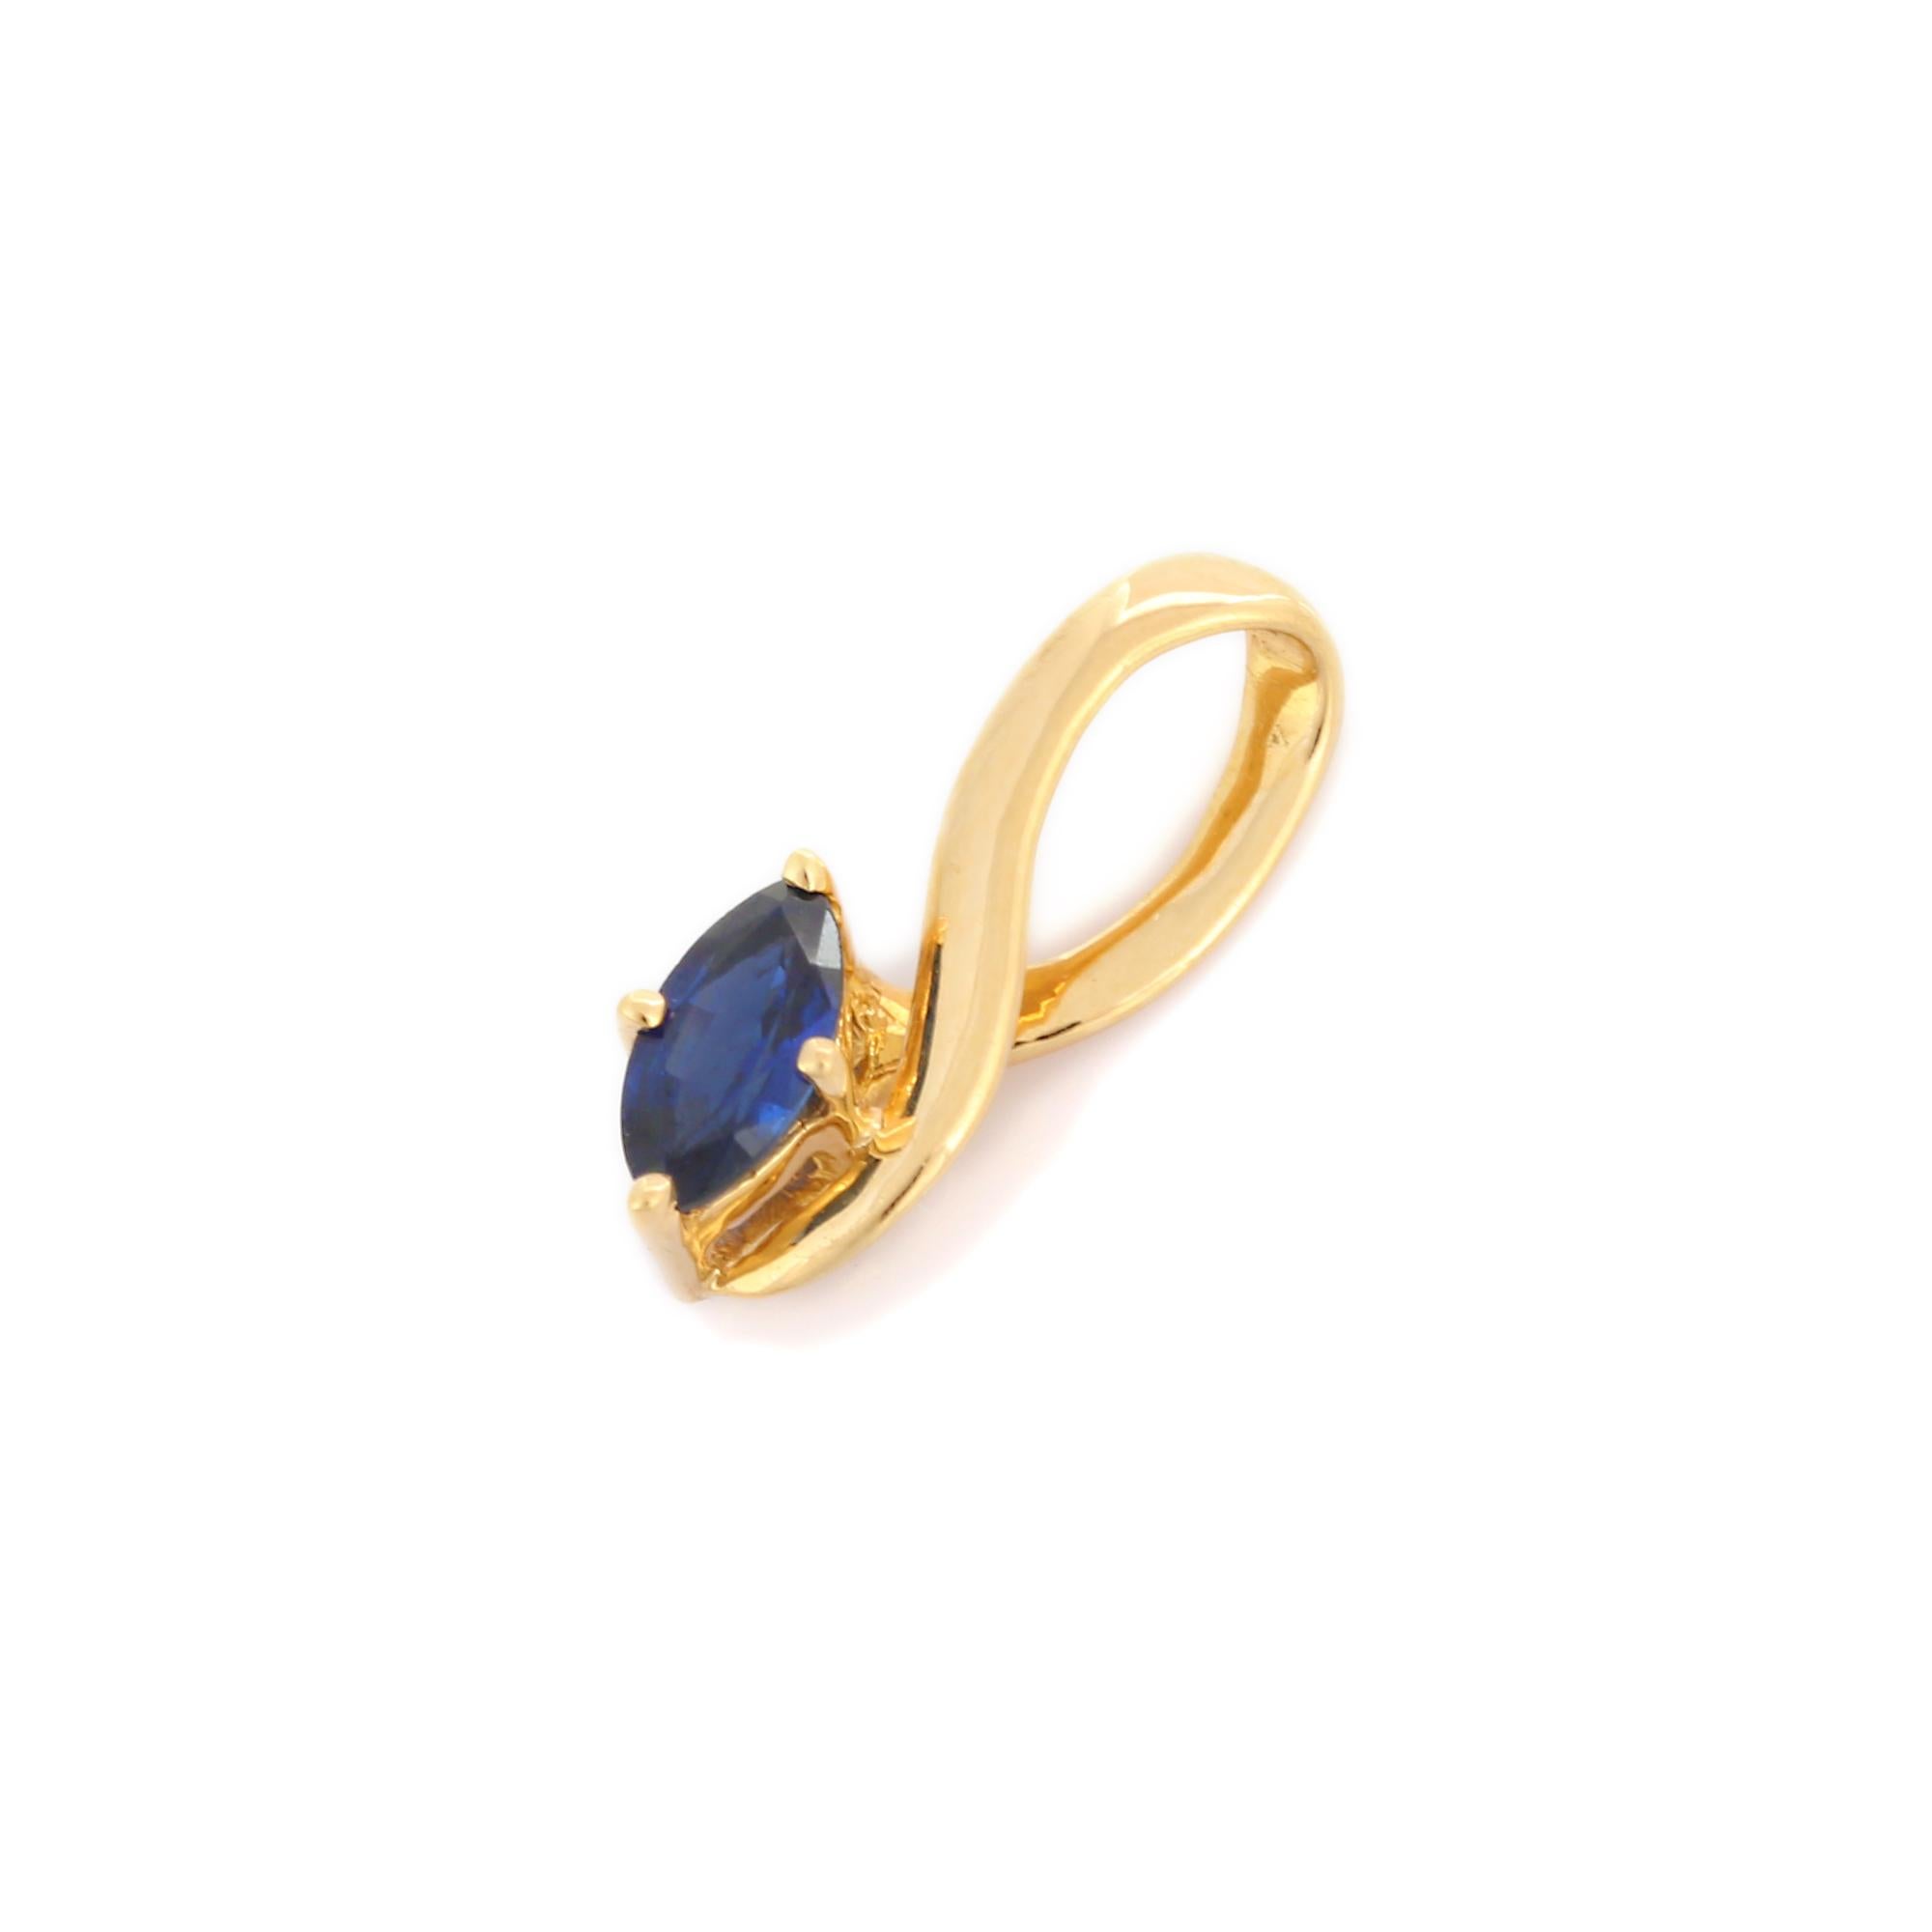 Natural Blue Sapphire pendant in 18K Gold. It has a marquise cut sapphire that completes your look with a decent touch. Pendants are used to wear or gifted to represent love and promises. It's an attractive jewelry piece that goes with every basic